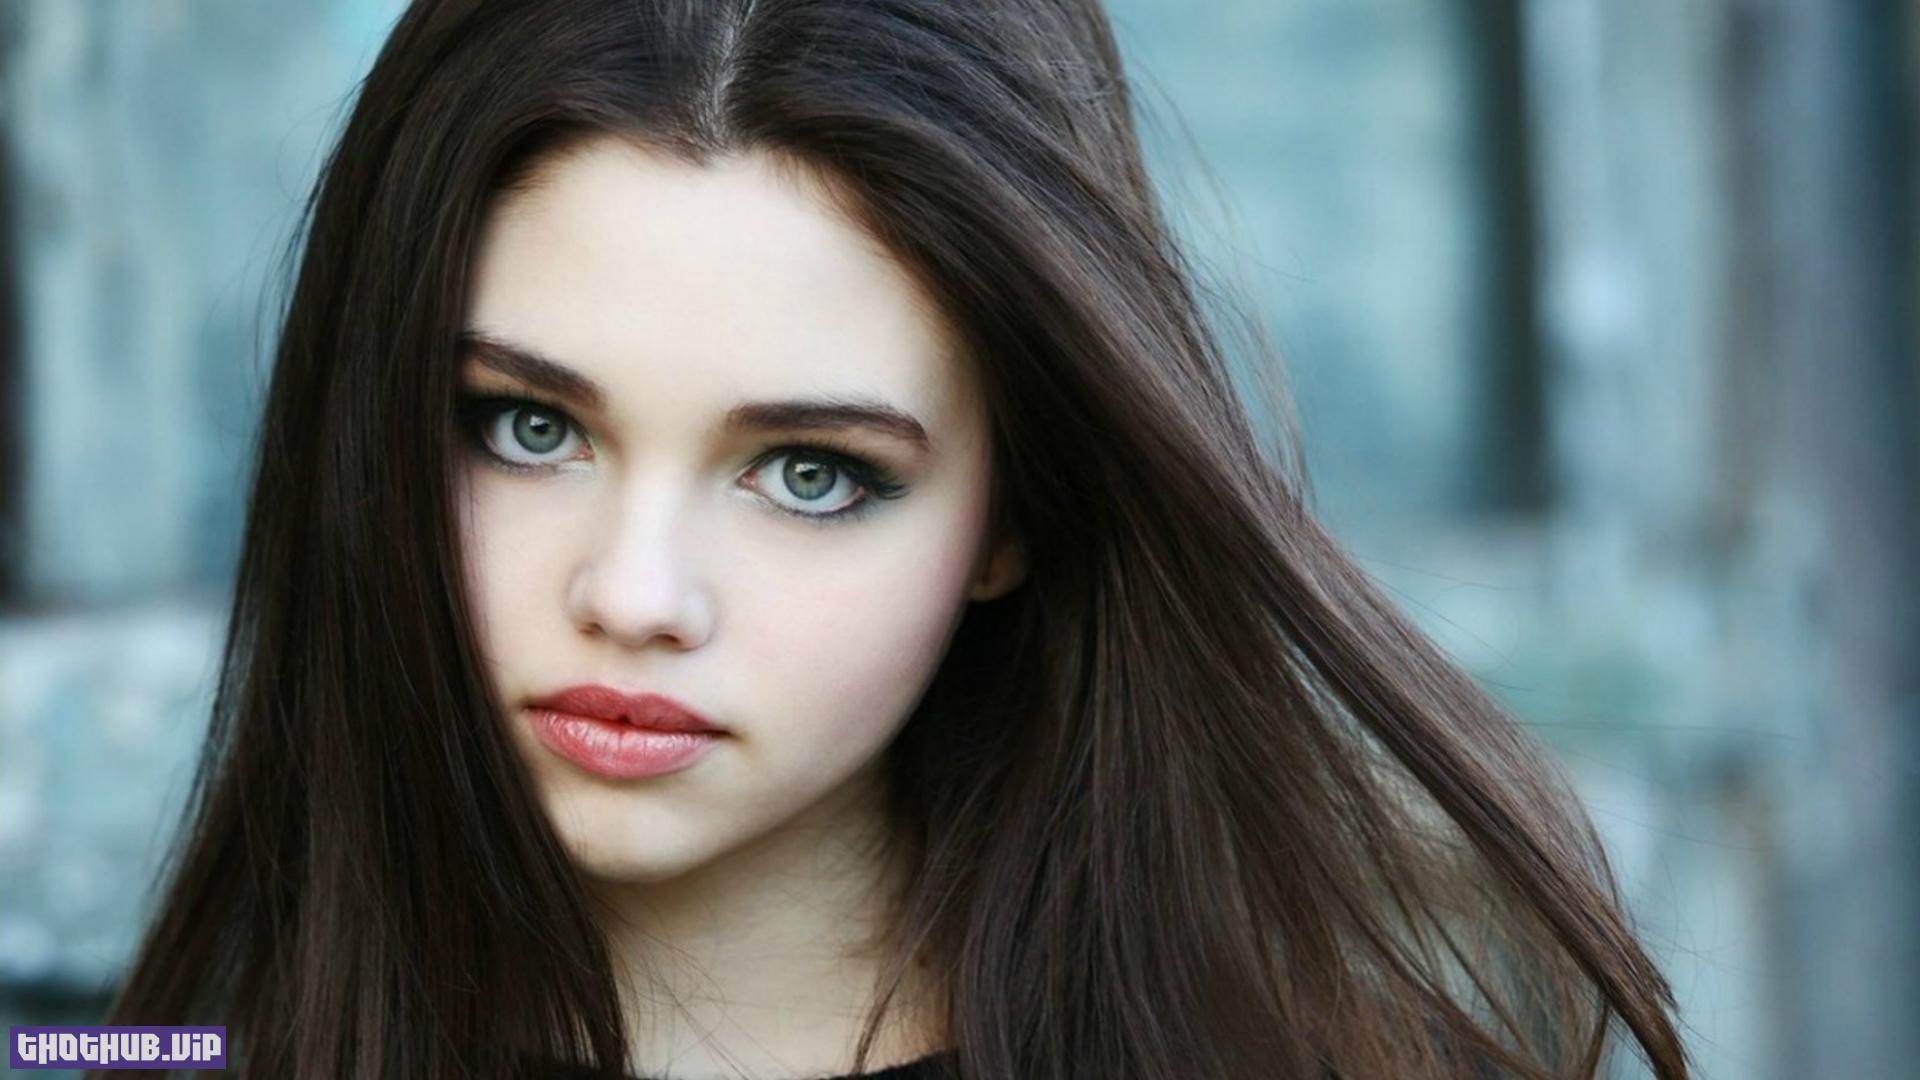 India Eisley Hot And Sexy Photos On Thothub